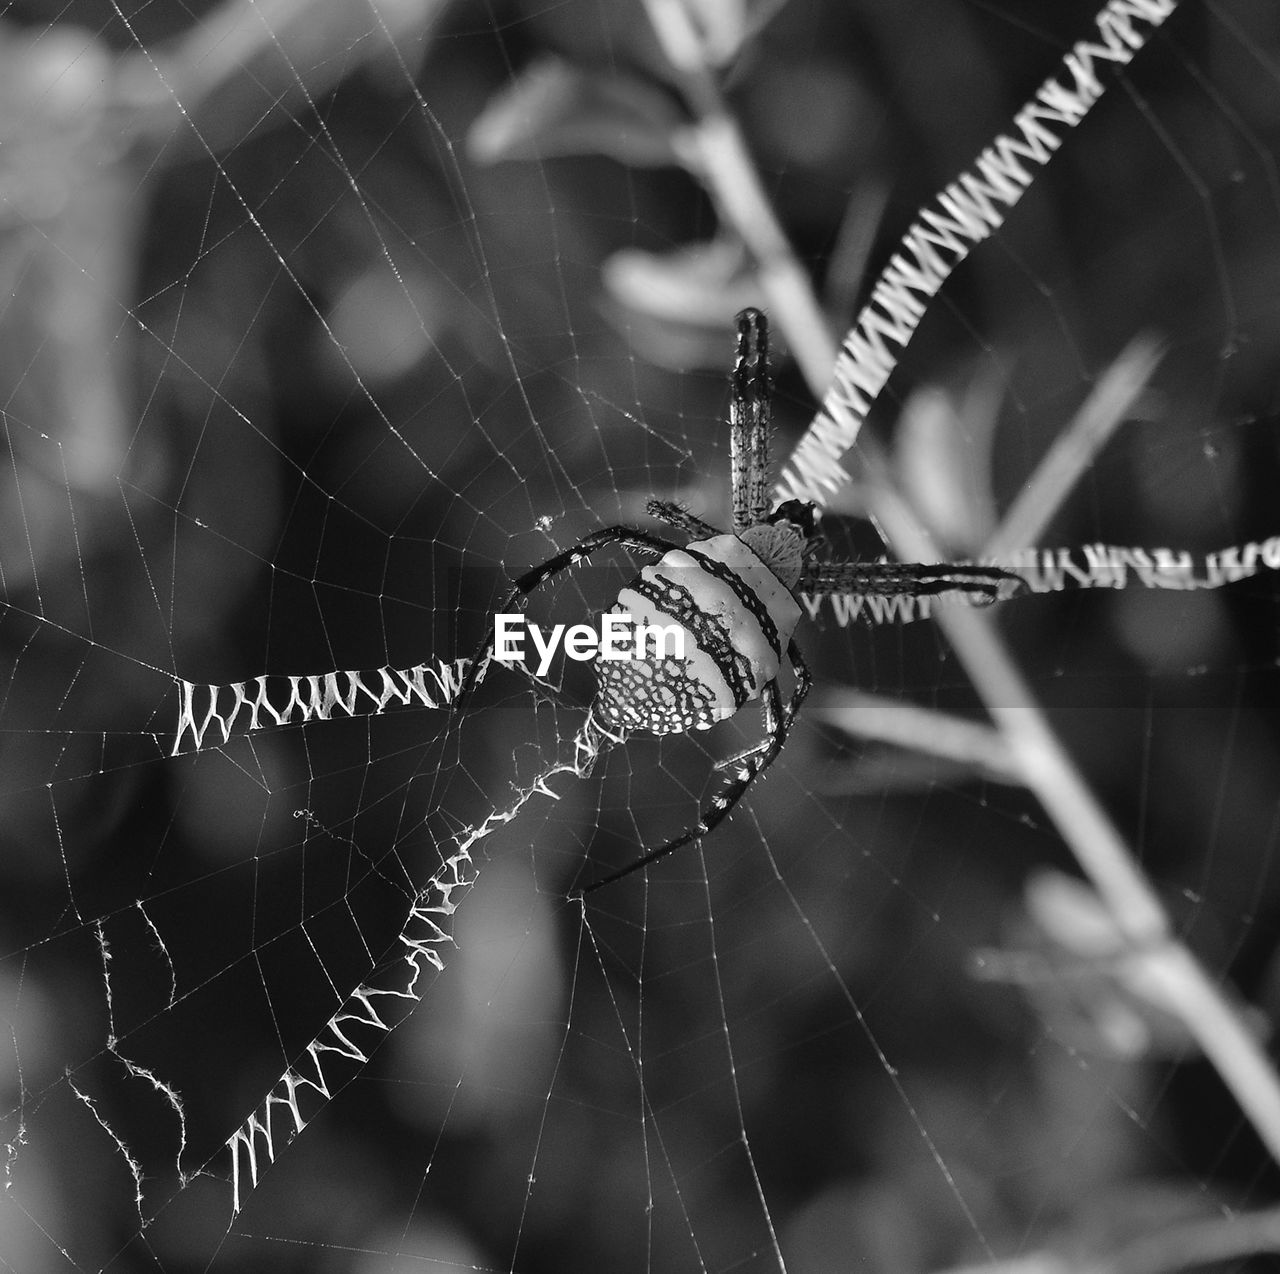 CLOSE-UP OF SPIDER ON WEB OUTDOORS